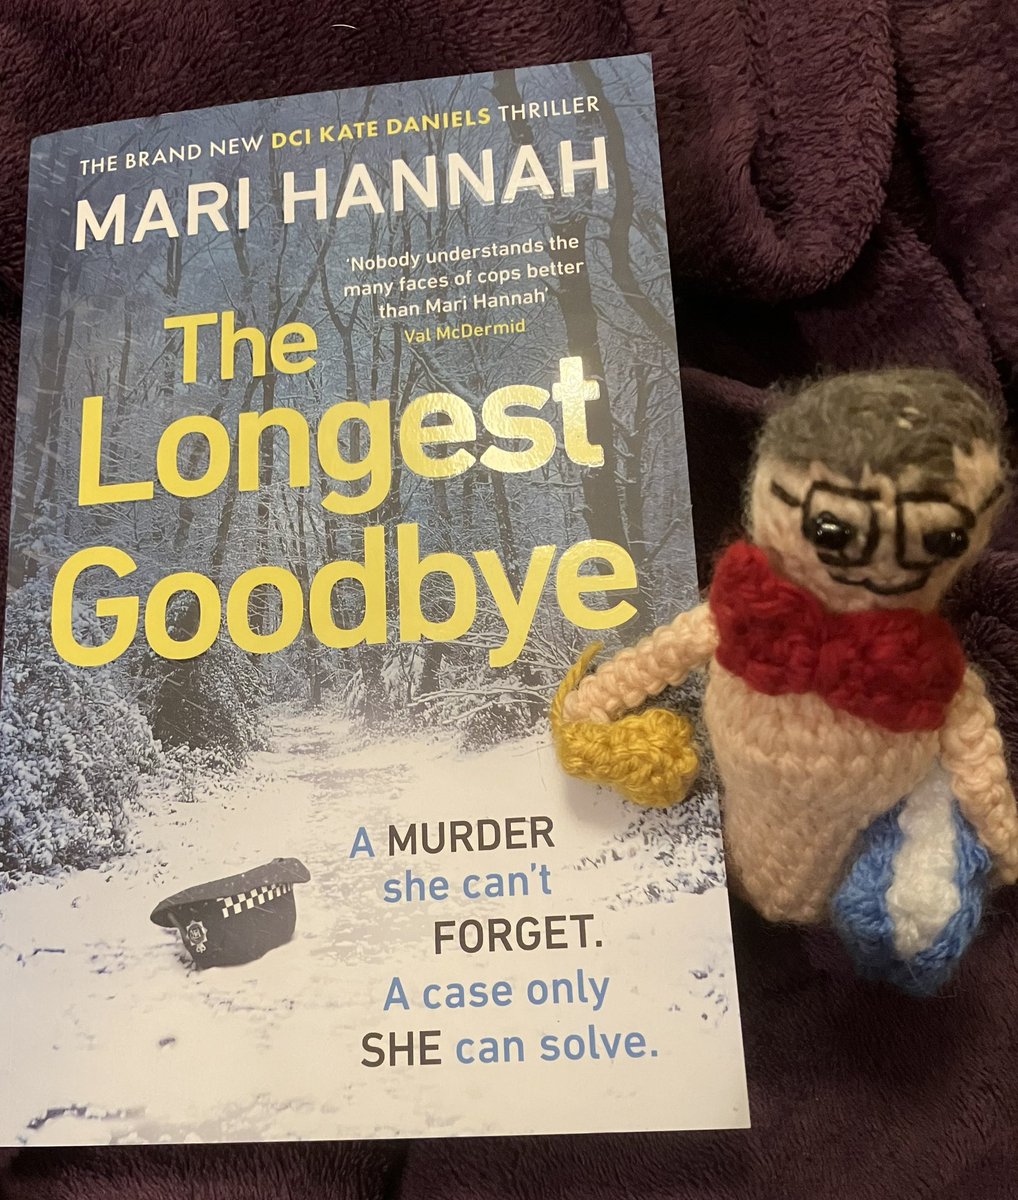 Mari I don’t say this lightly but The Longest Goodbye is not only an exceptional 5* read, but for me your best yet, out now in paperback highly recommend, review to follow @mariwriter @orion_crime